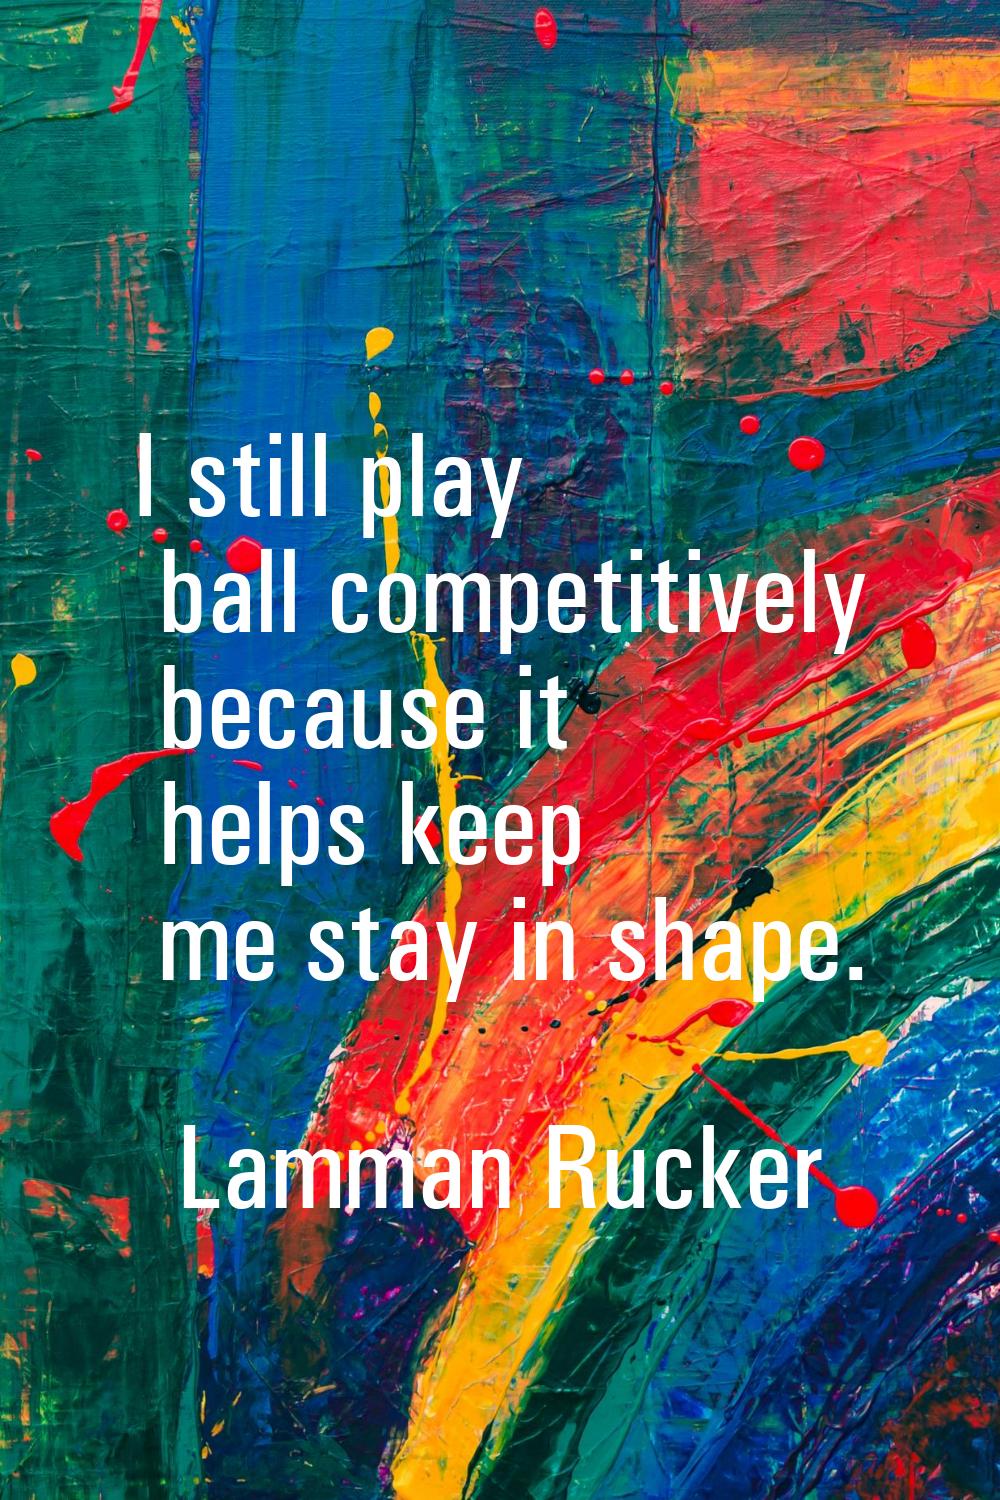 I still play ball competitively because it helps keep me stay in shape.